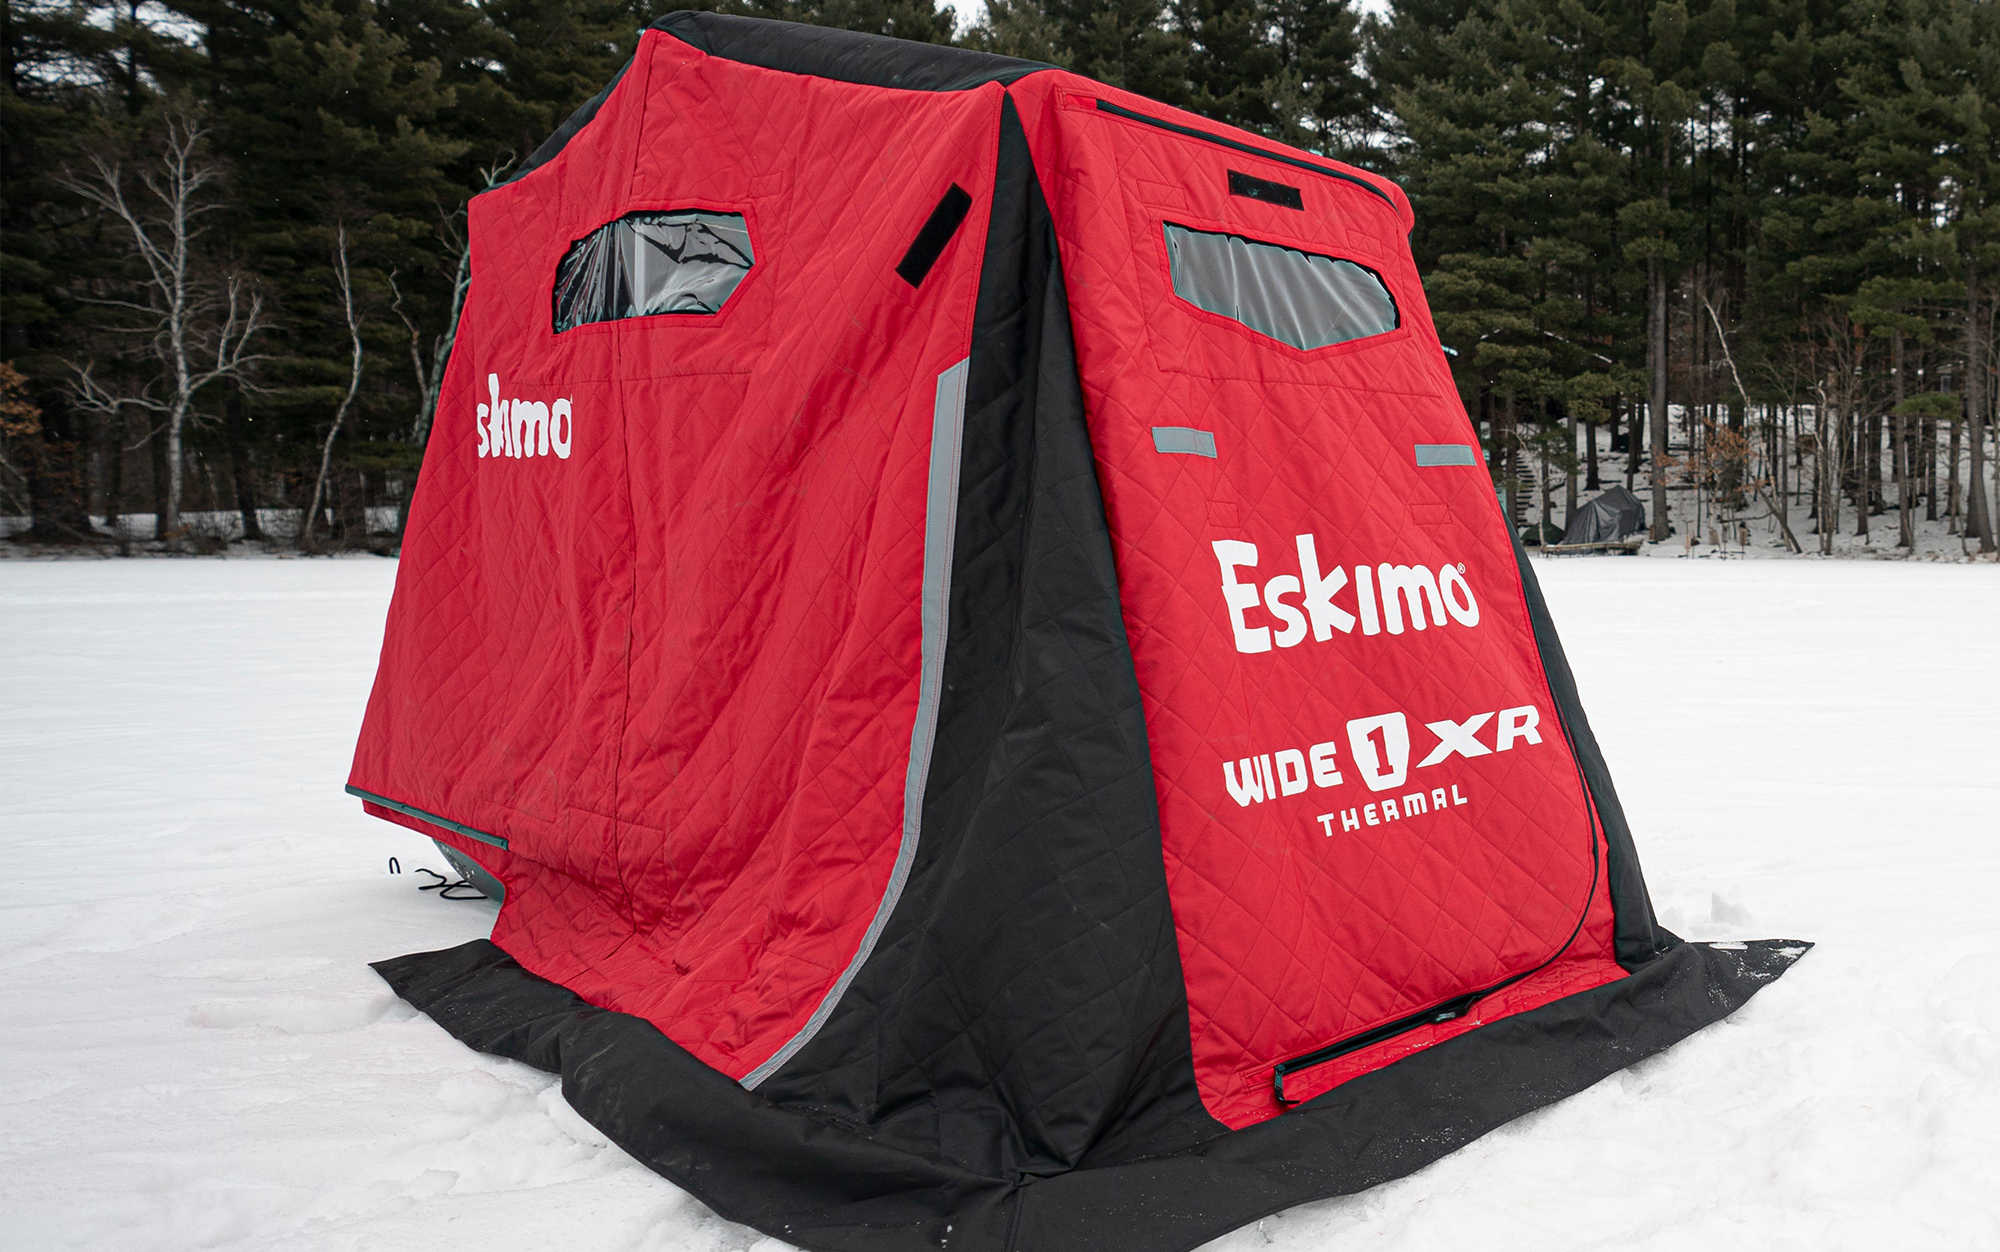 The Eskimo Wide 1 XR Thermal is the most roomy one-person ice fishing shelter.